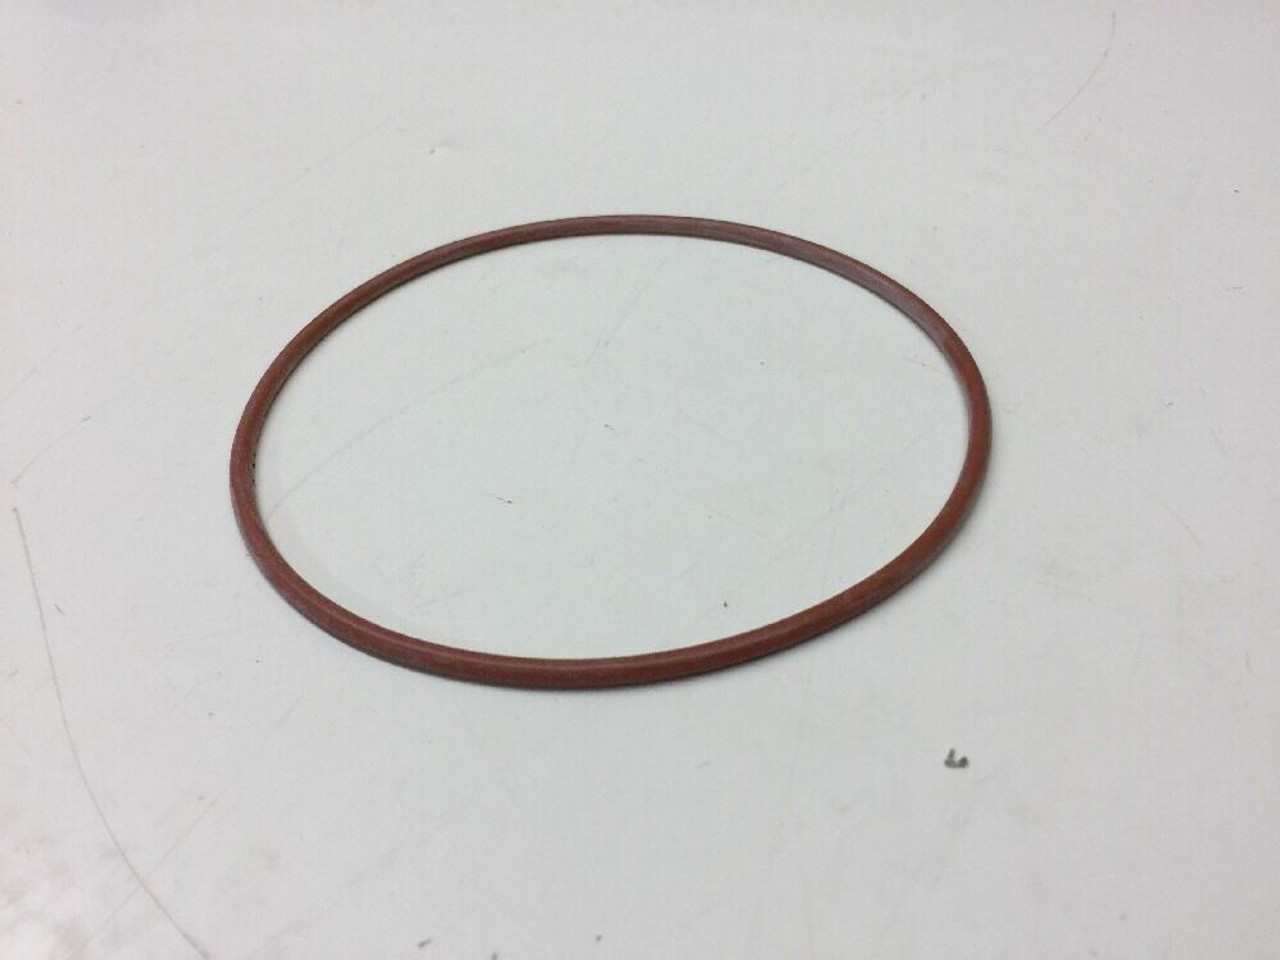 Preformed O-Ring Seal AS3582-247 Rubber Silicone